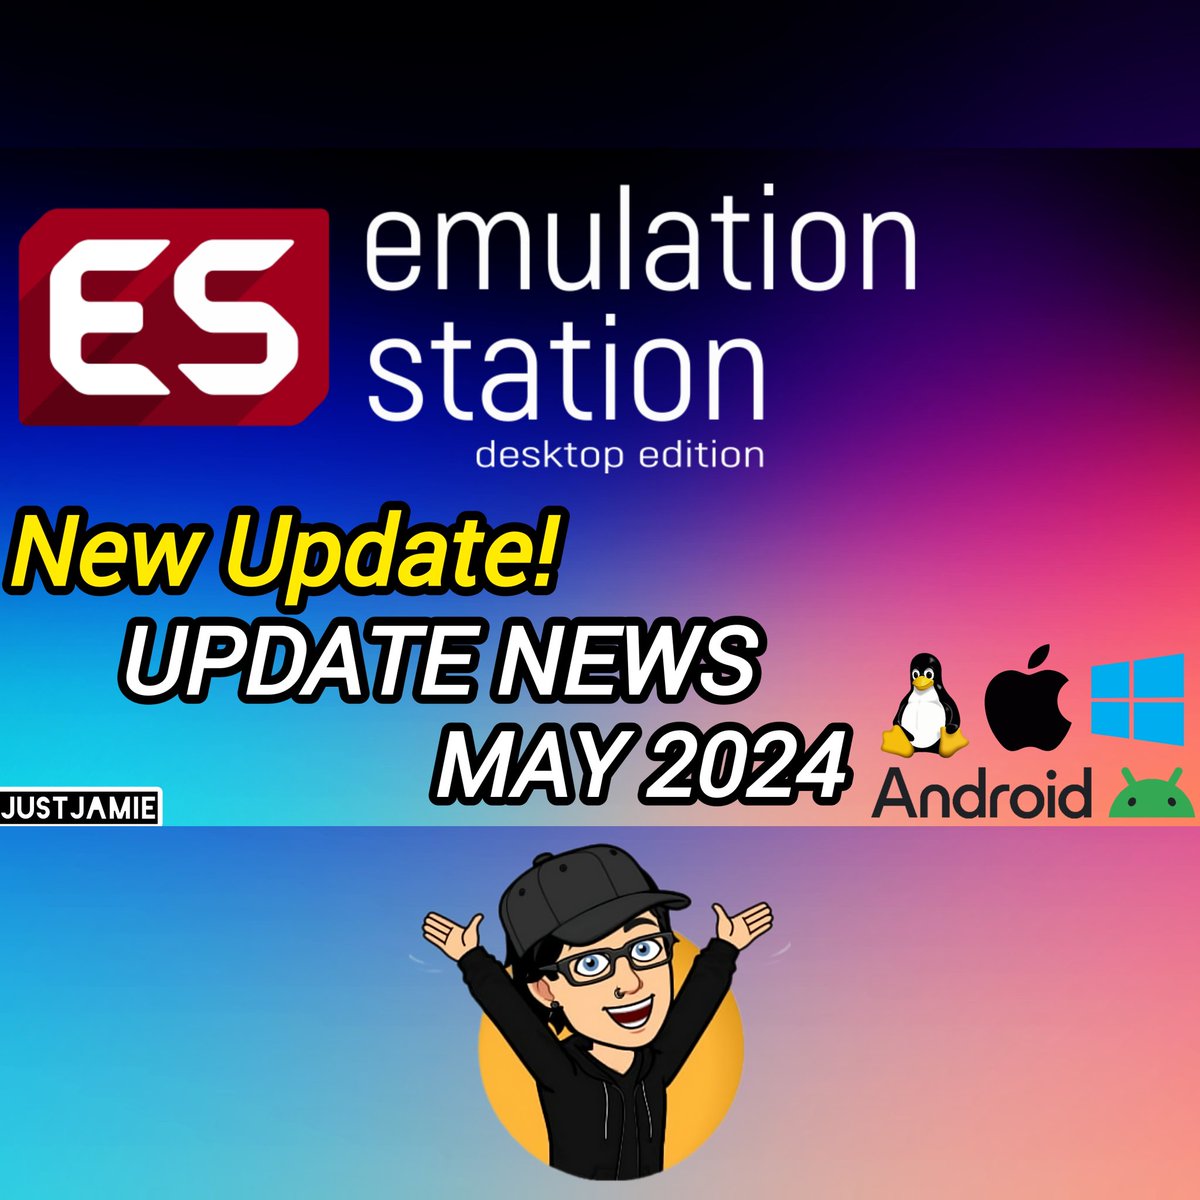 EmulationStation DE has a new update. Great news for particular platform users. Find out what's fixed and what's included here: youtu.be/Npxt-9zYPjQ #emulationstation #esde #frontend #emulator #retrogaming #justjamie